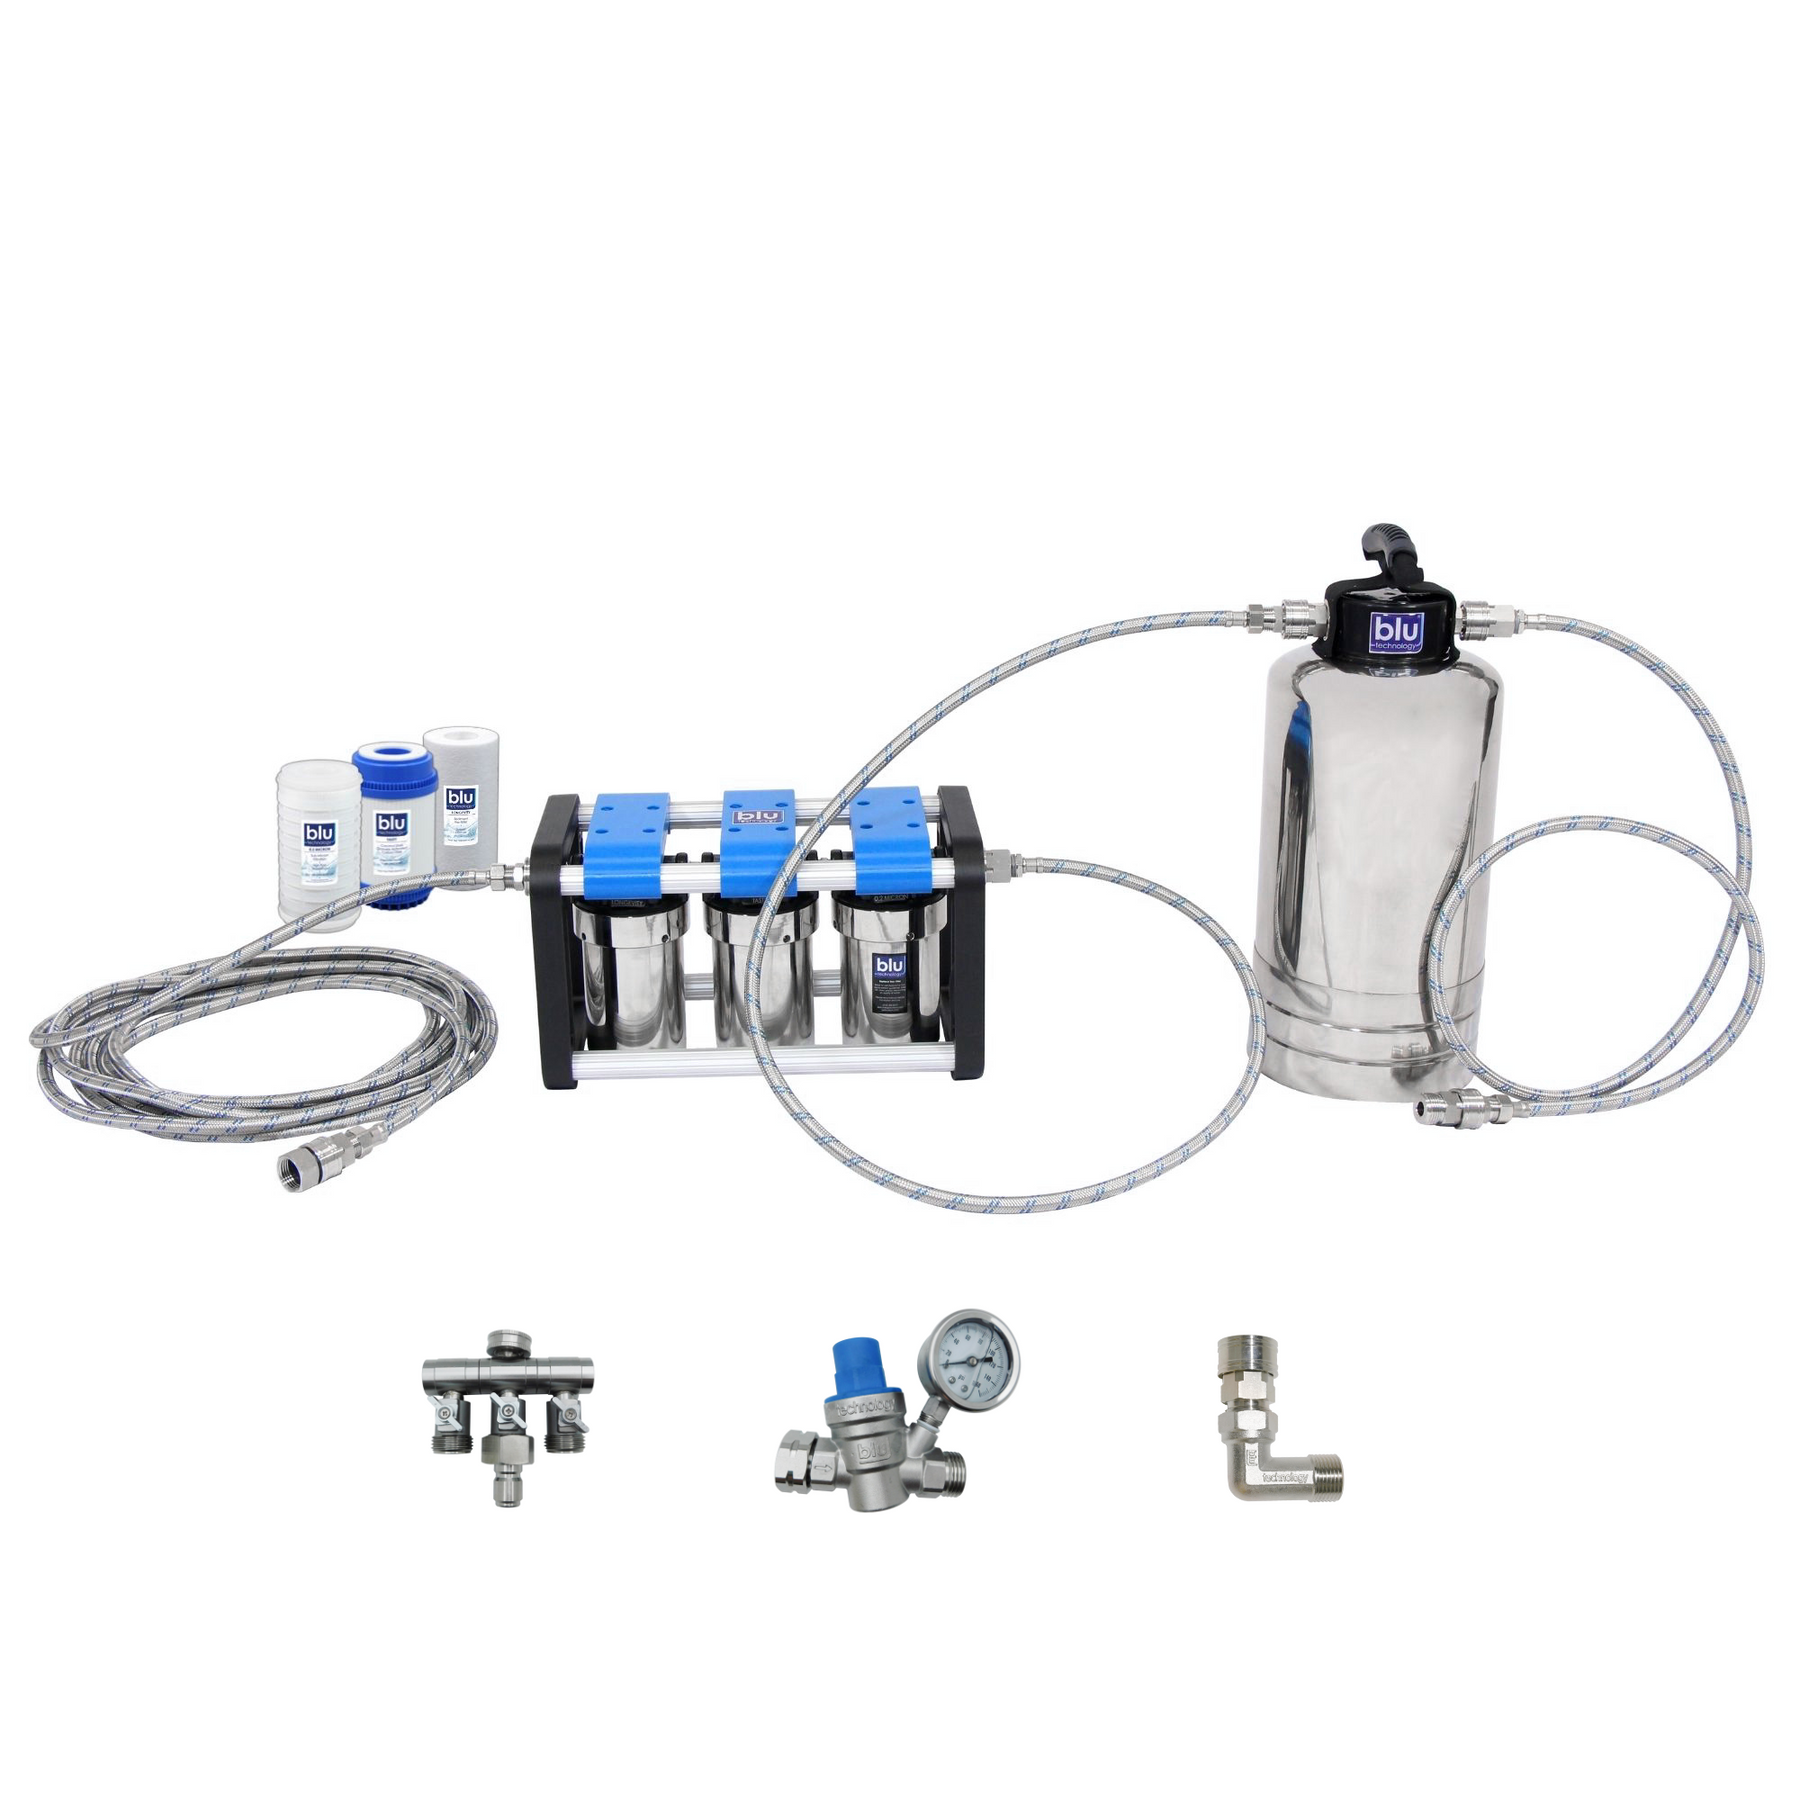 Blu Tech R3 ELITE Bundle  Fully Equipped 3-Stage Filtration